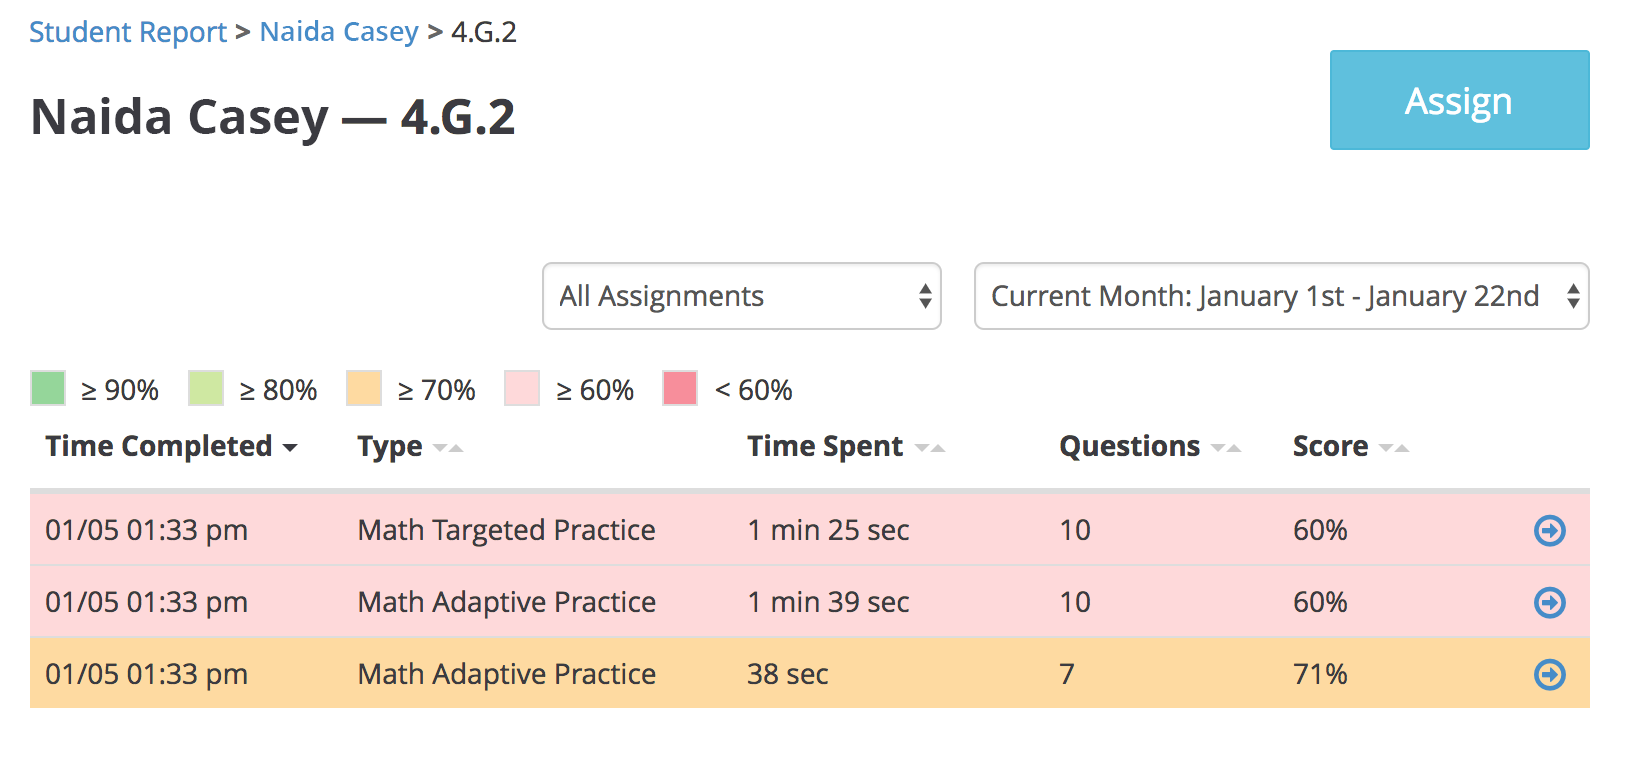 Student data for a single standard: for all the work the student has been doing within the standard, the time of completion, type of work, time spent, number of questions, and scores are shown in a color-coded table.